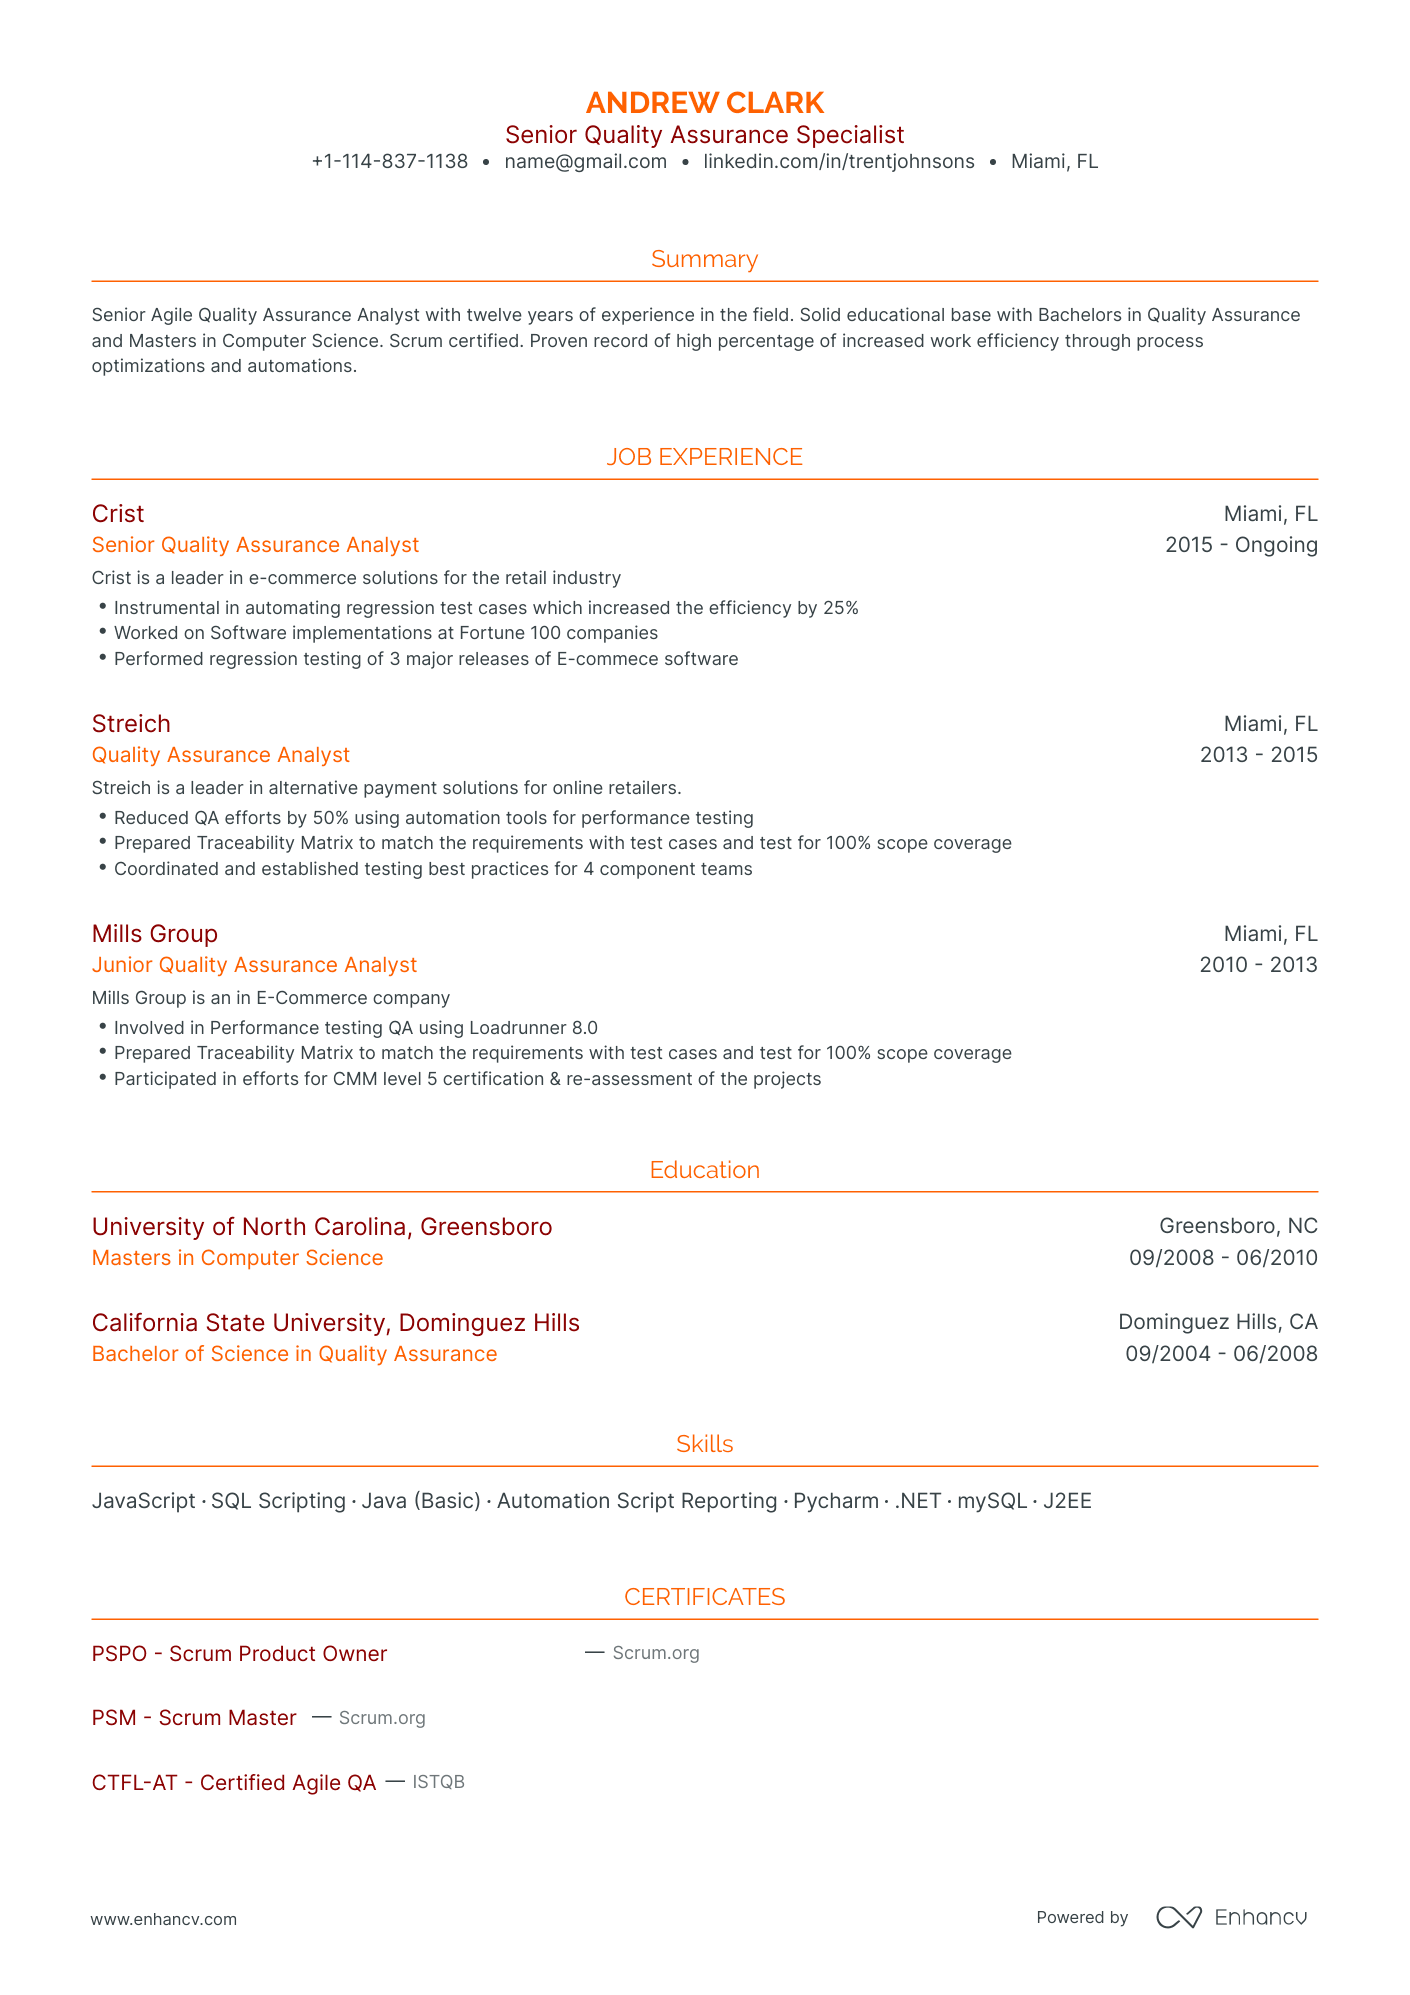 Traditional QA Analyst Resume Template